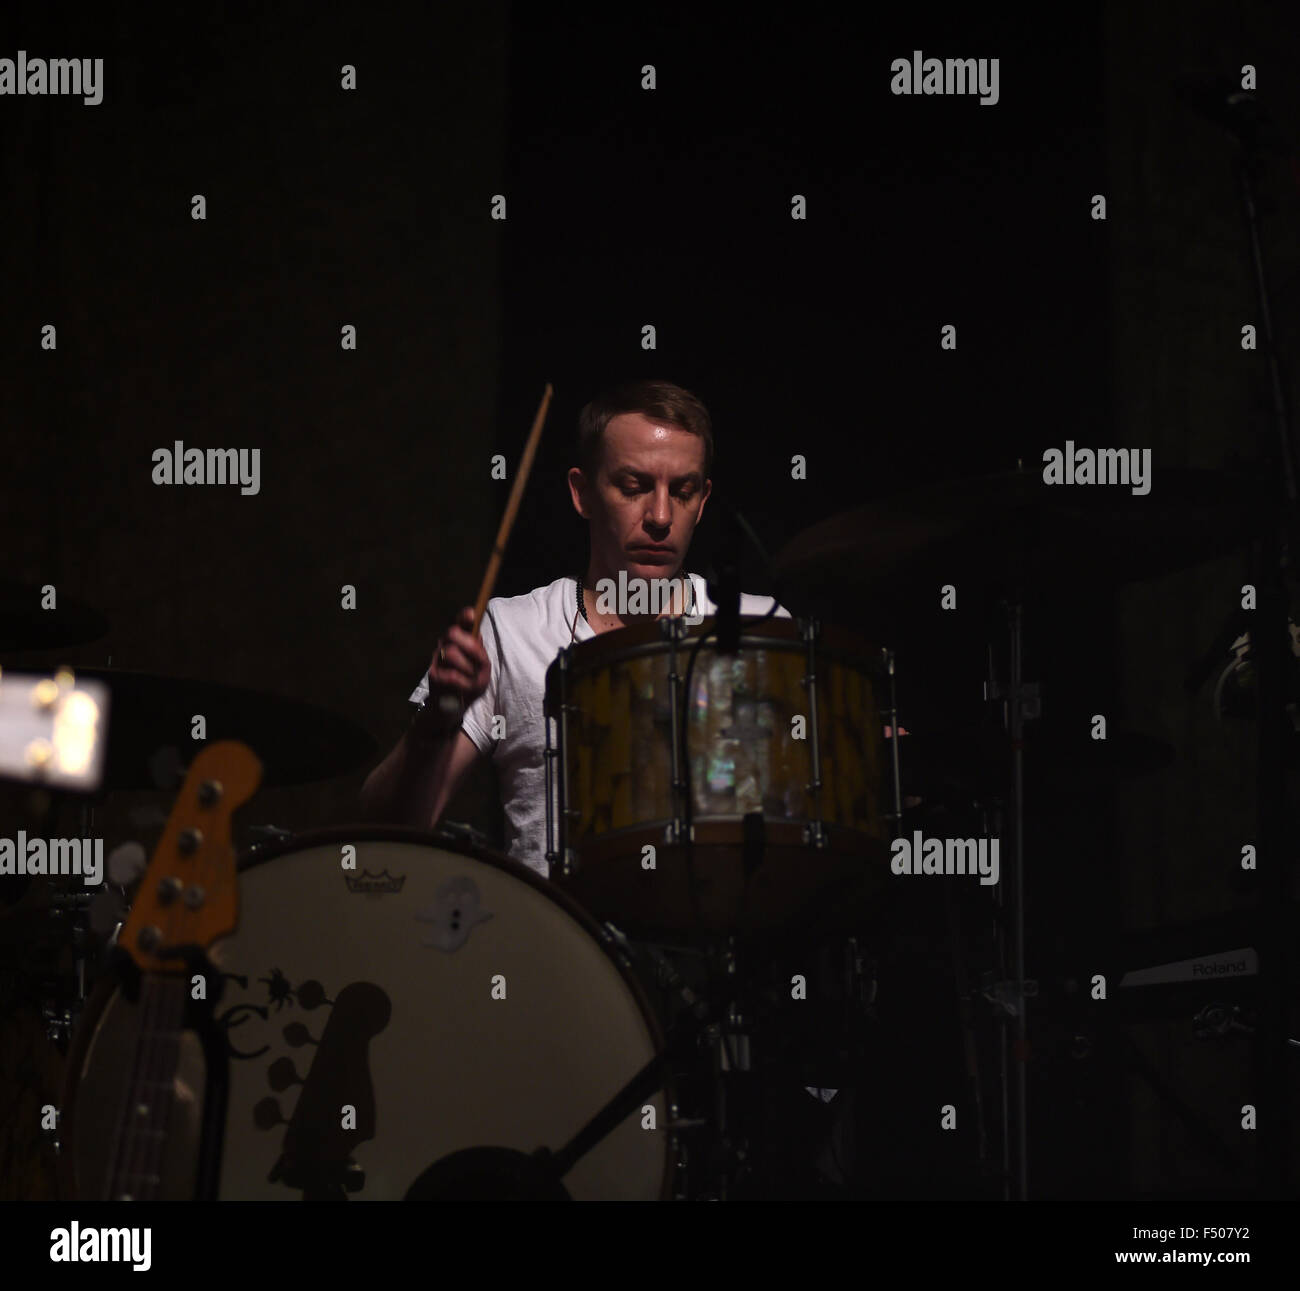 Oct. 24, 2015 - Norfolk, VIRGINIA, USA - MODEST MOUSE comes to the CONSTANT CENTER at OLD DOMINION UNIVERSITY  in NORFOLK, VIRGINIA on 24 OCTOBER 2015. (Credit Image: © Jeff Moore via ZUMA Wire) Stock Photo